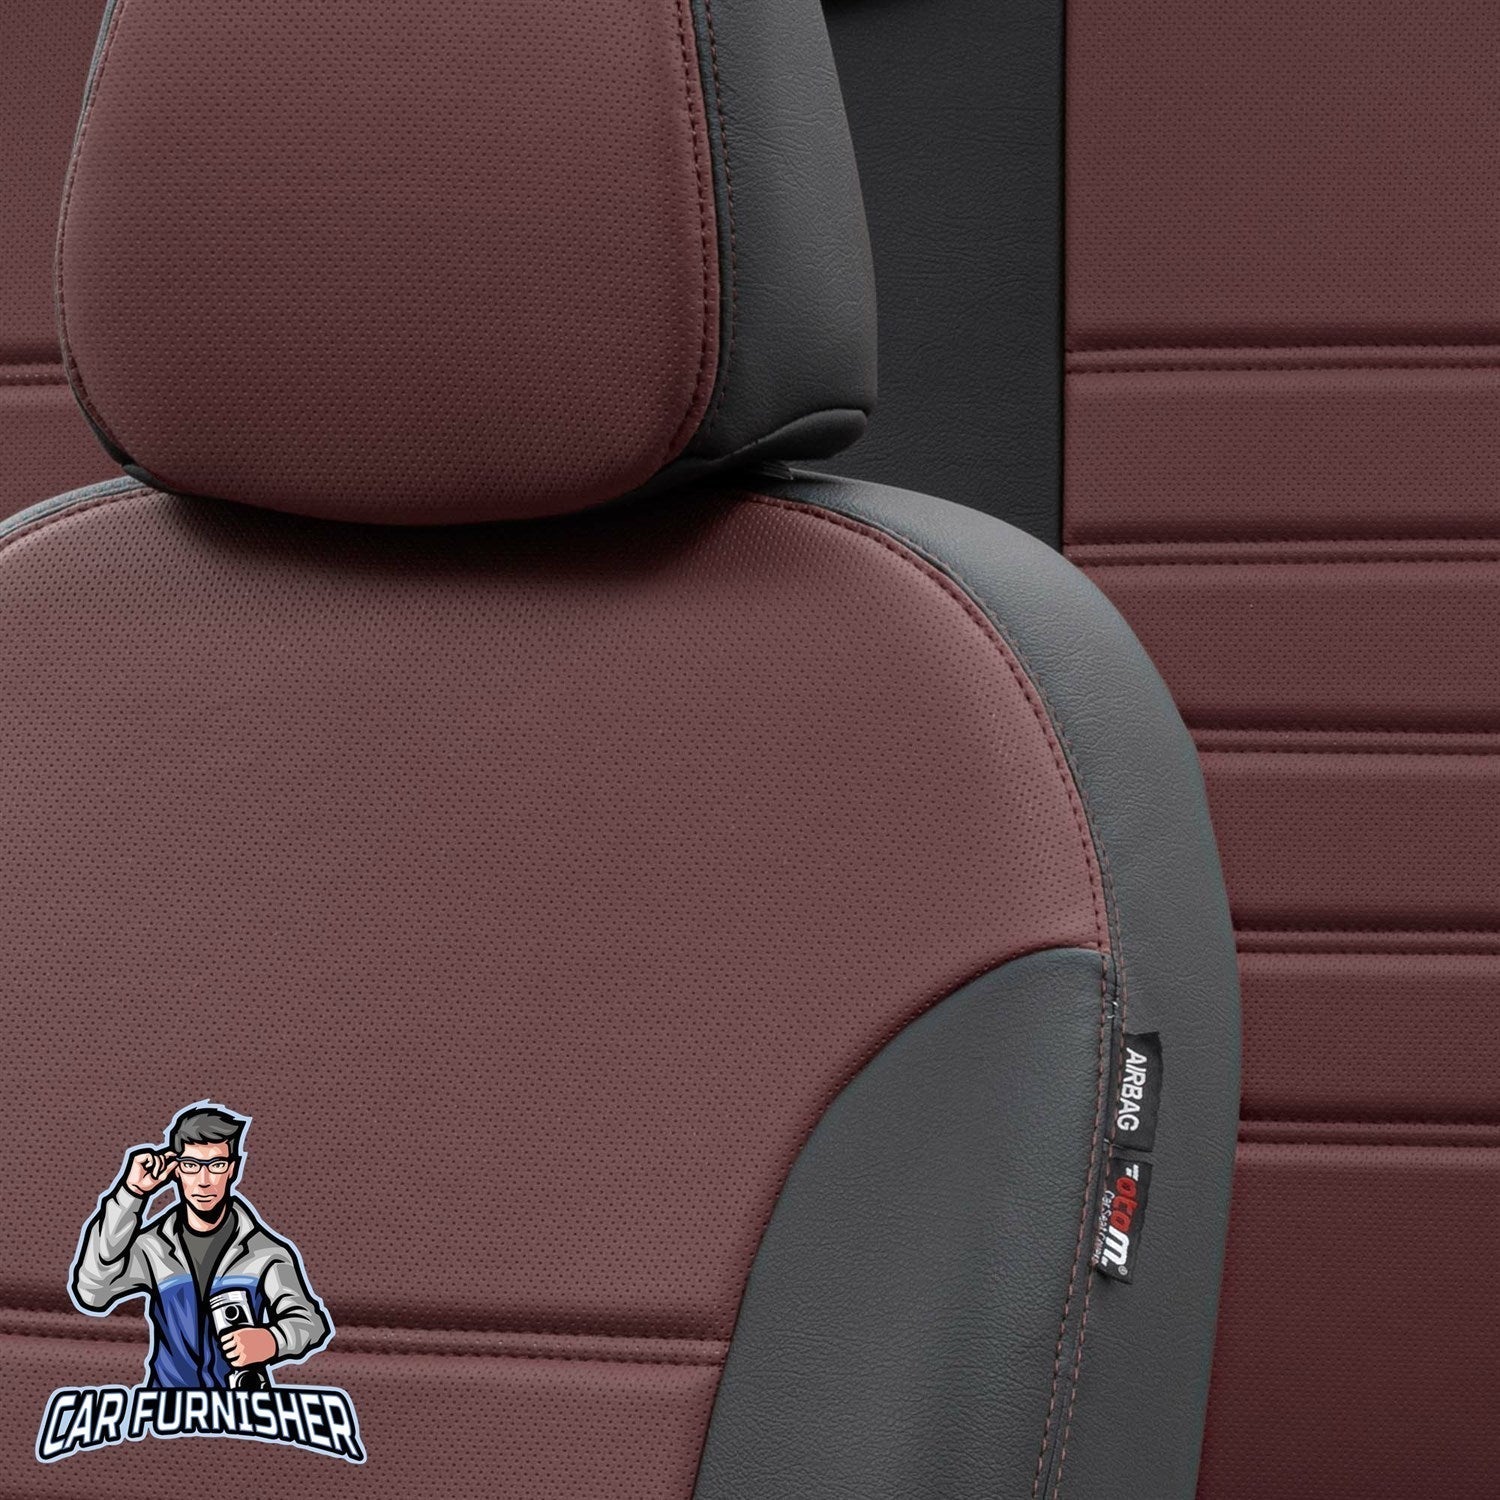 Skoda Roomstar Seat Cover Istanbul Leather Design Burgundy Leather